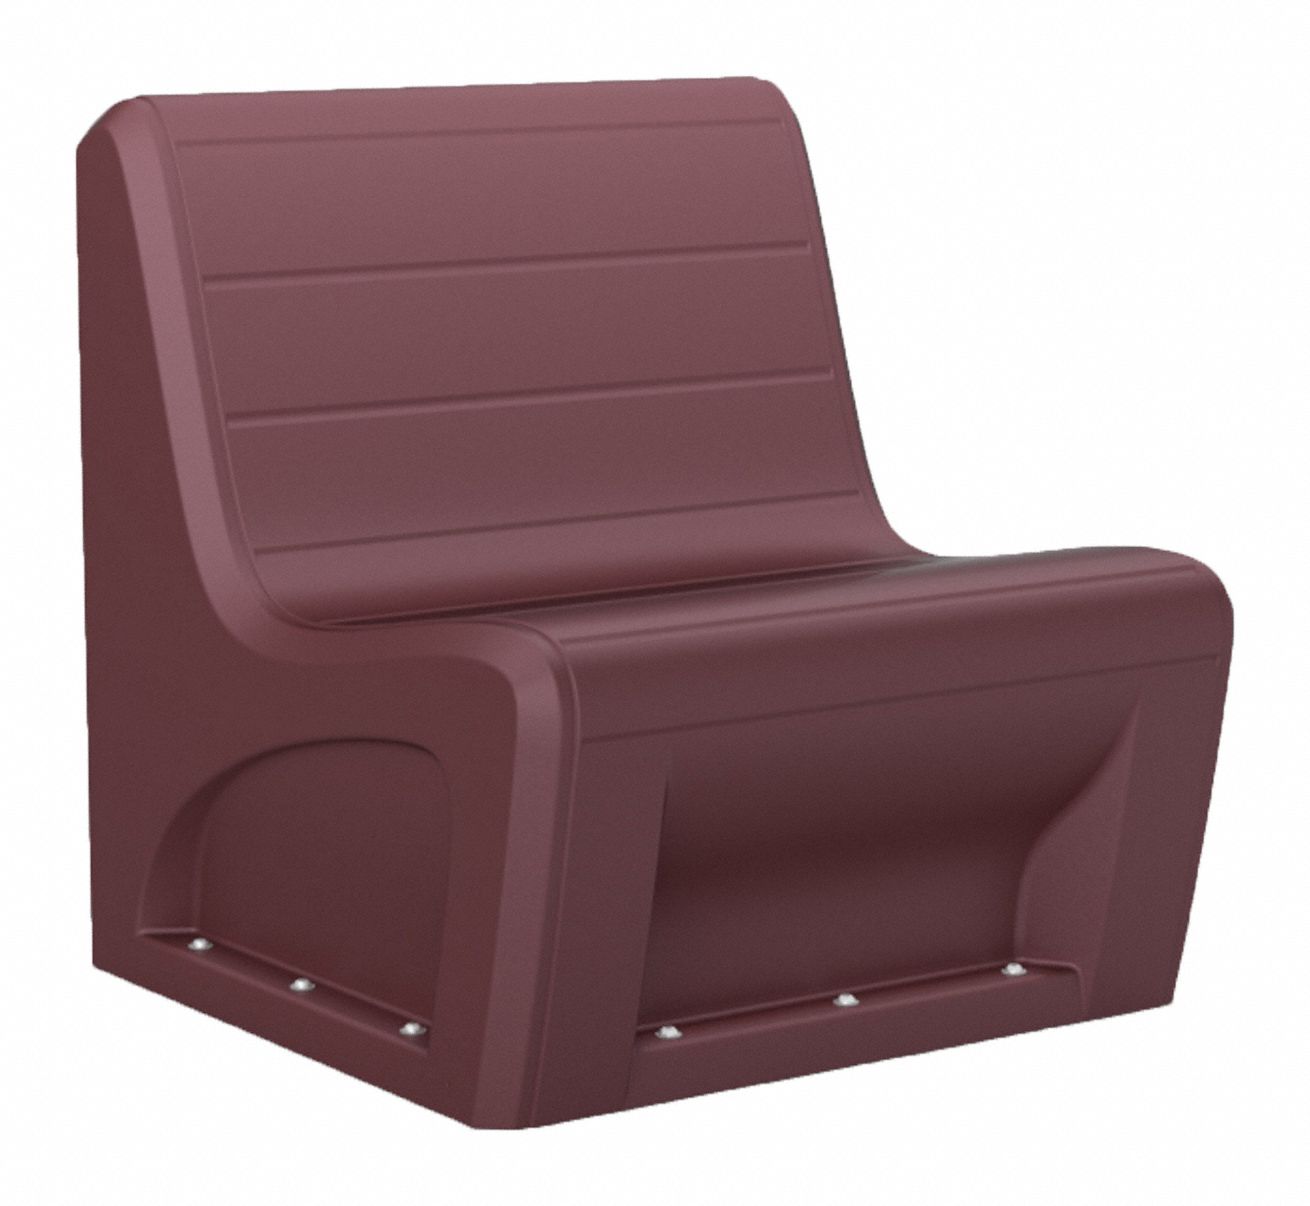 Sabre Sectional Chair w/Sand Port Burgundy: 30 1/2 in Wd, 32 in Lg, 33 in Ht, Burgundy